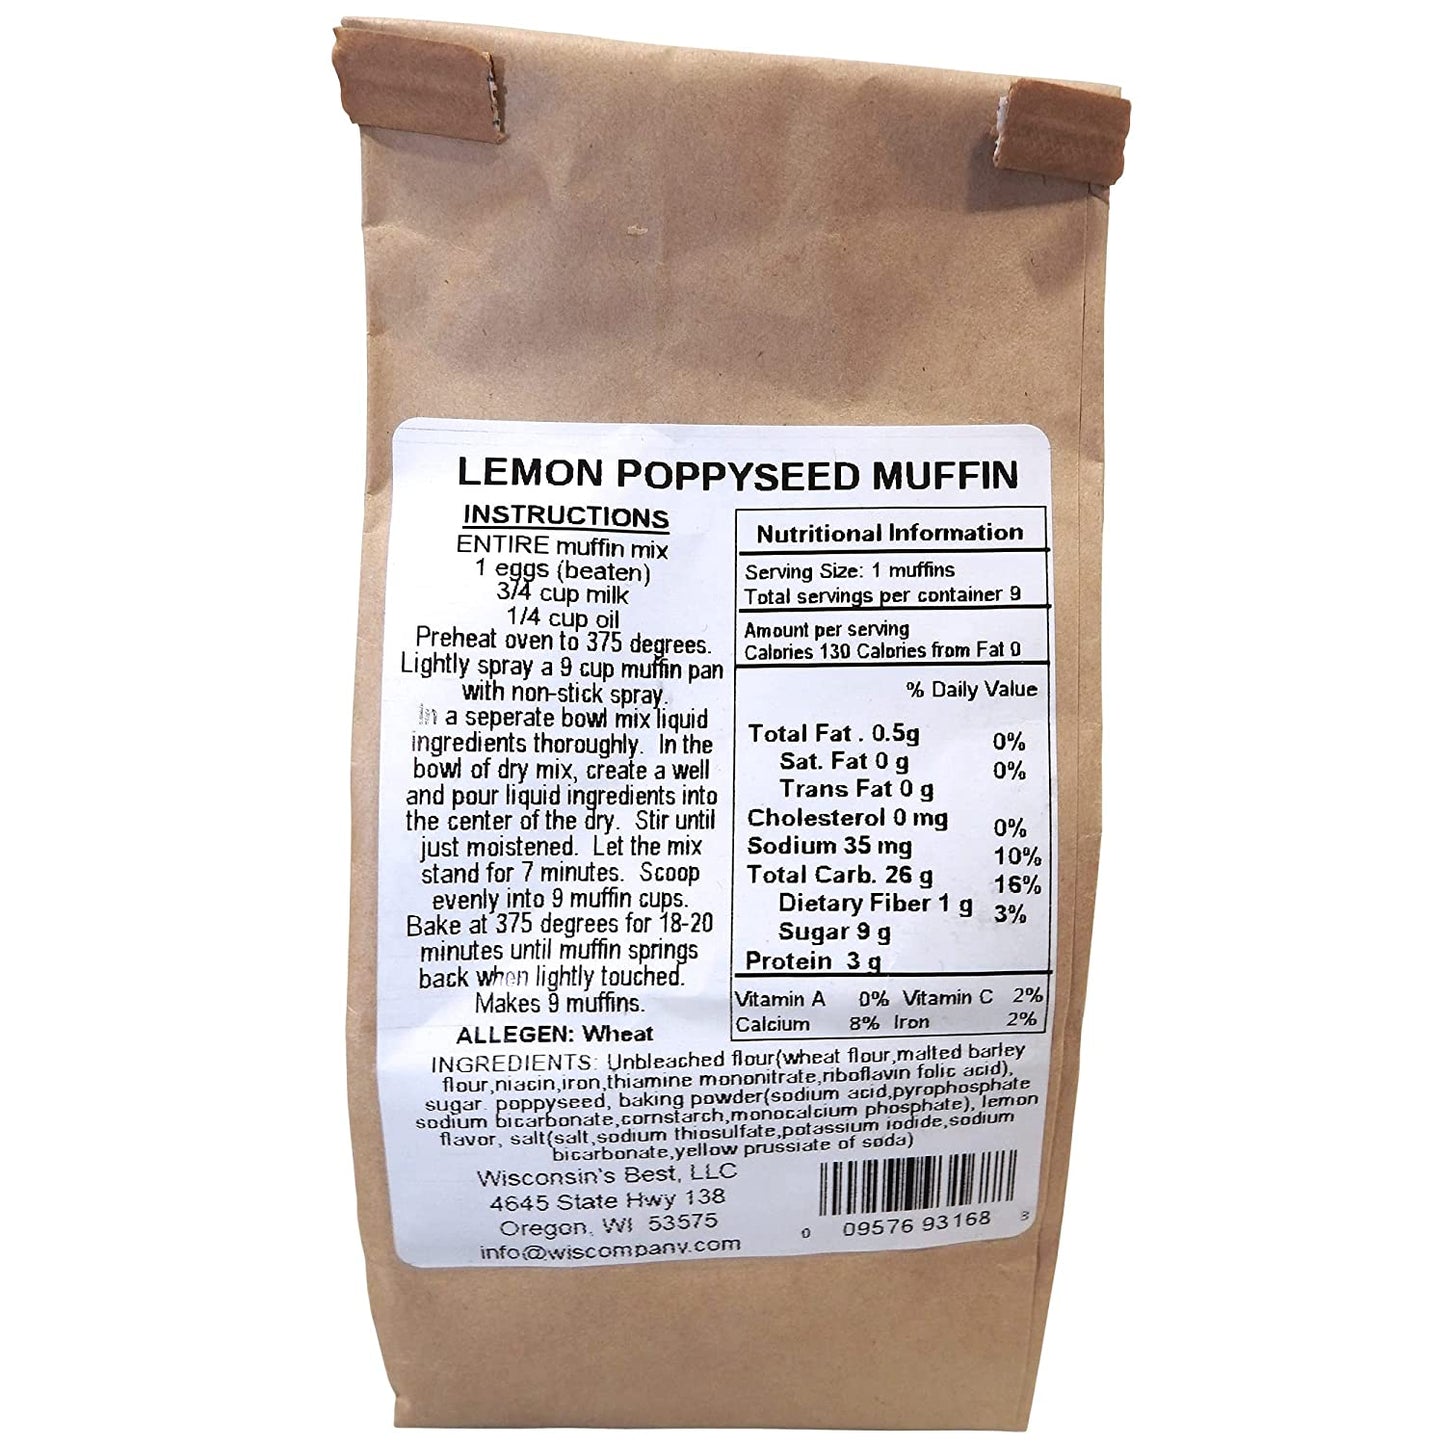 Wisconsin's Best Lemon Poppyseed Muffin Mix, 12oz. (Pack of 2) A Great Gift for Mother's Day!